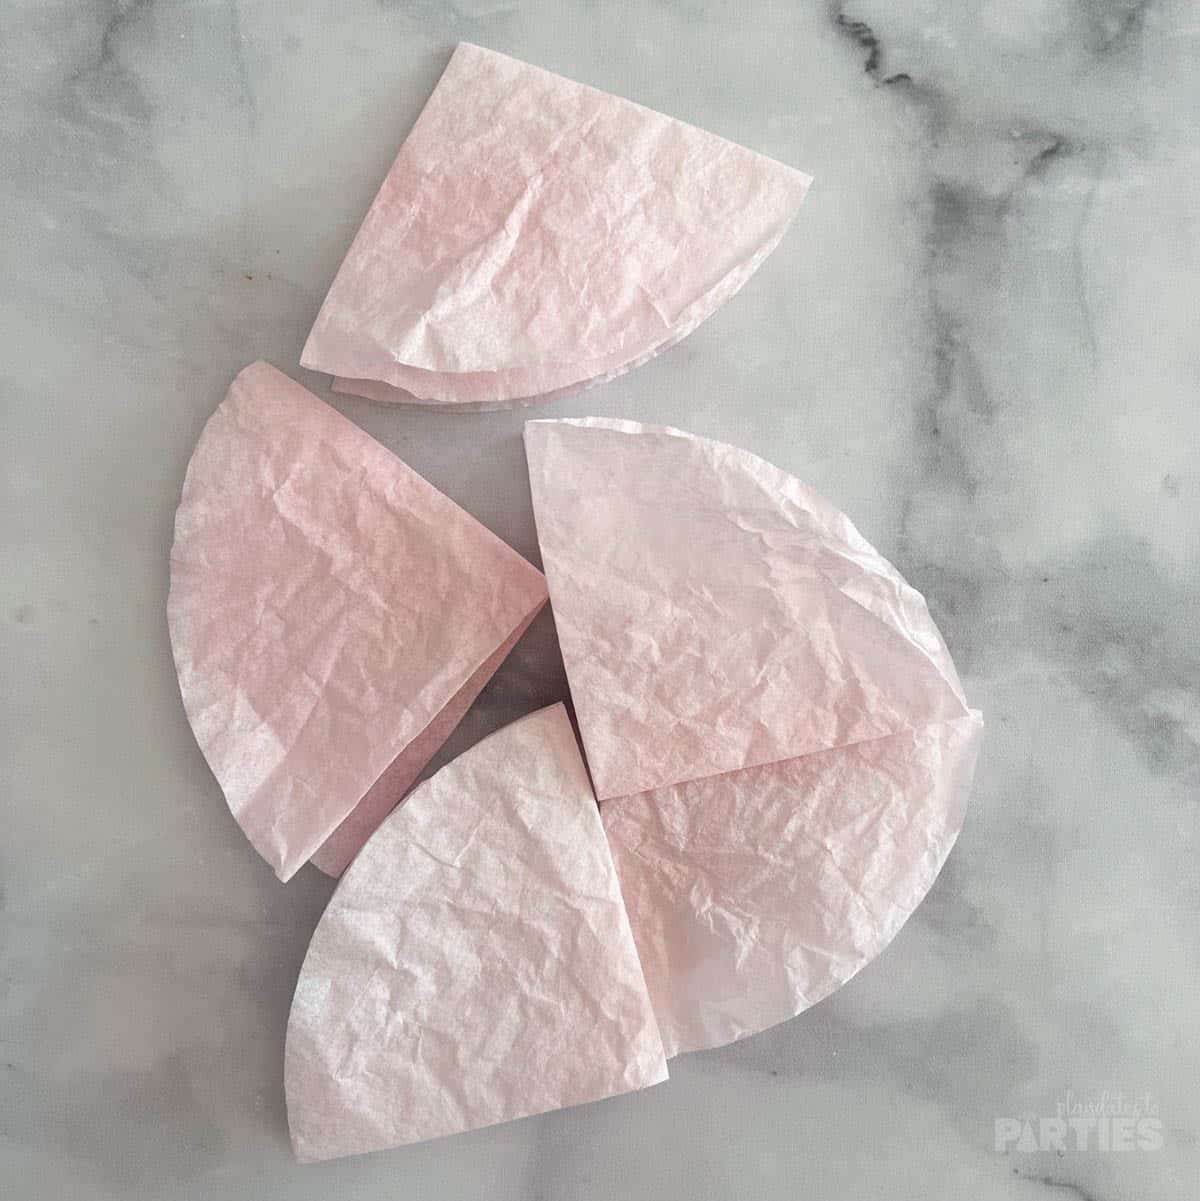 Coffee filters folded into quarters and strewn on a marble surface.